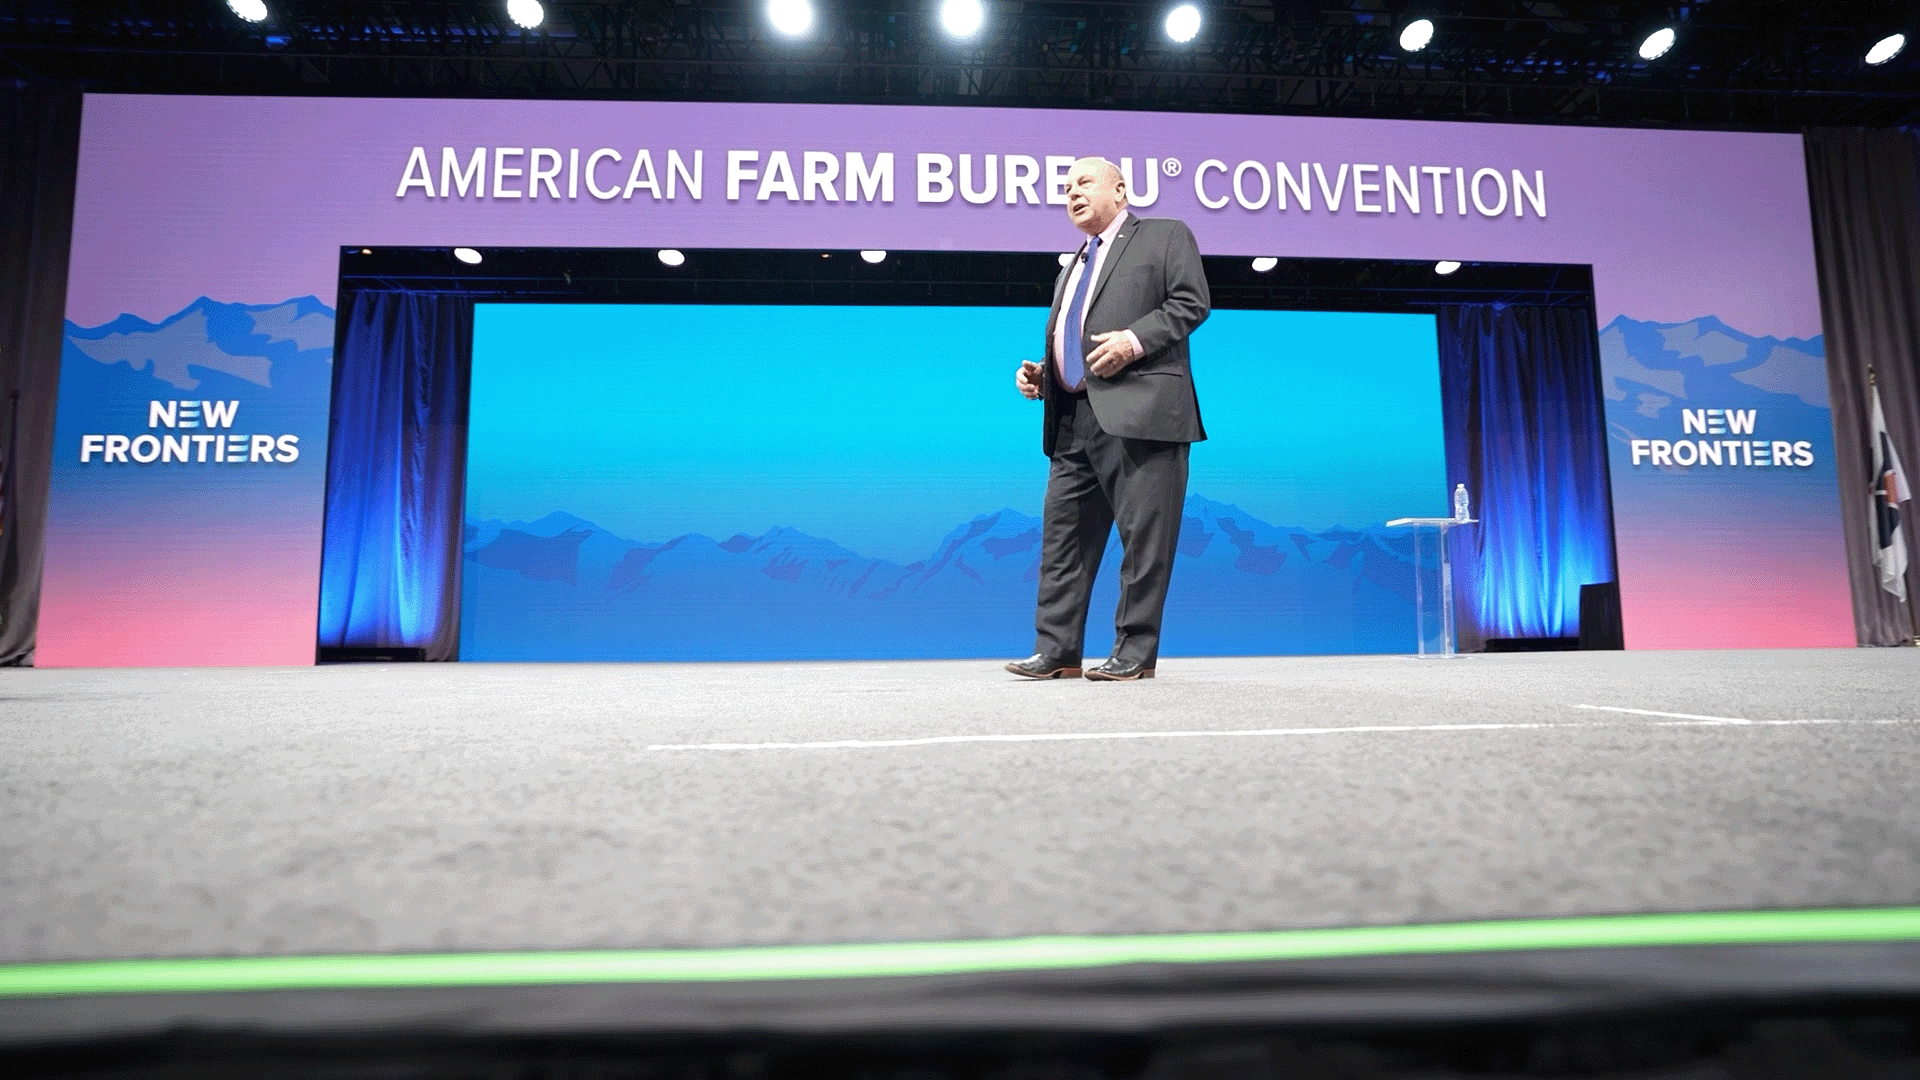 Farm Bureau Challenges Members To Conquer New Frontiers During Annual Convention in Utah